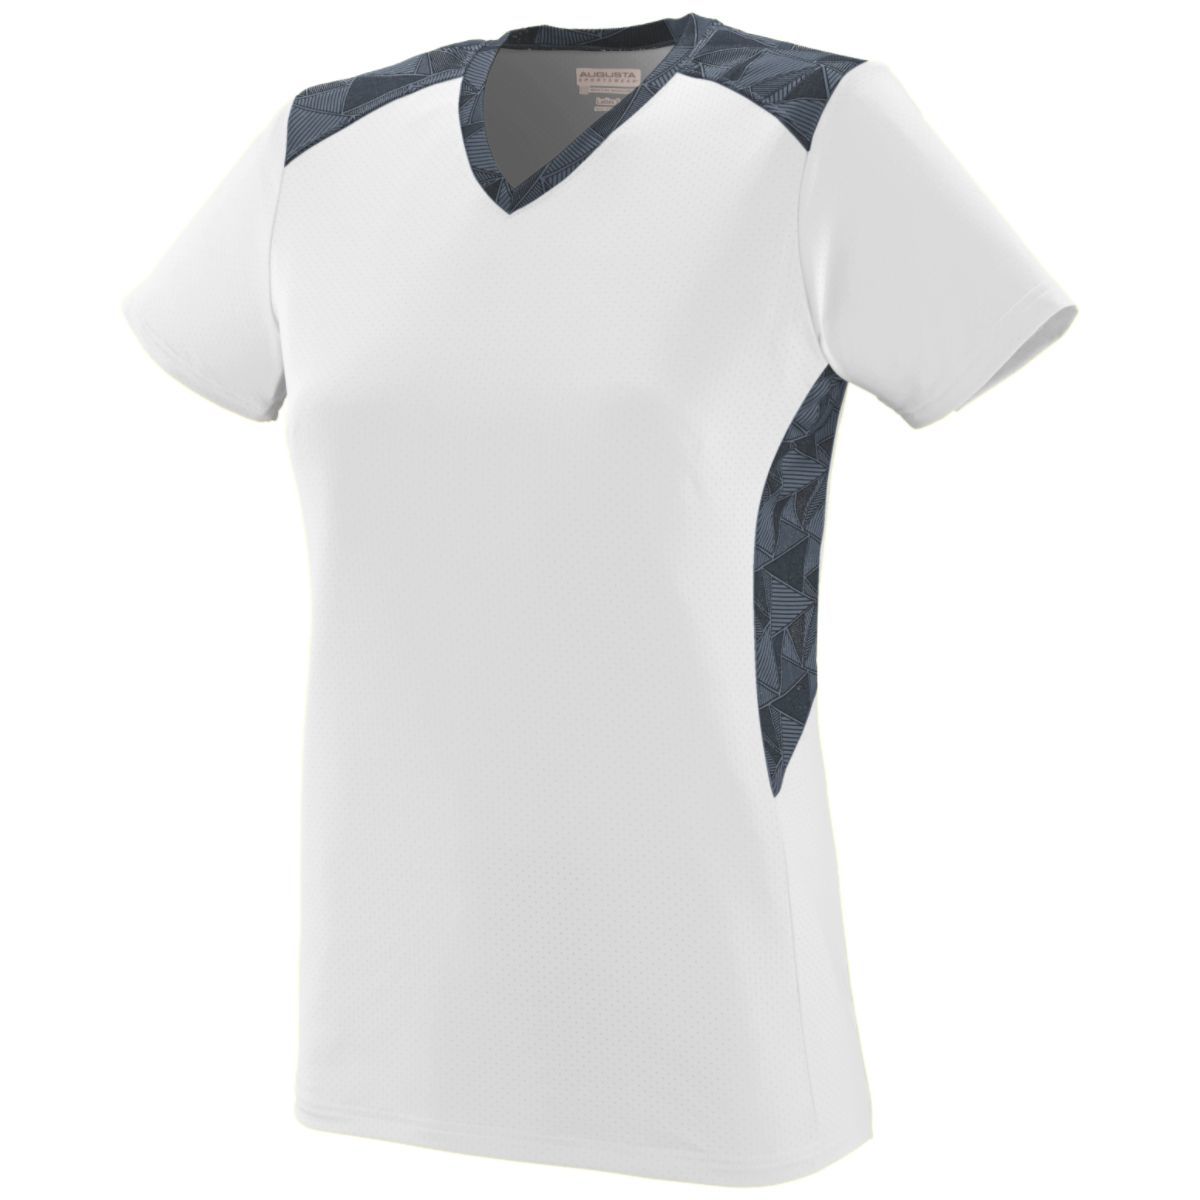 Augusta Sportswear Ladies Vigorous Jersey in White/Graphite/Black Print  -Part of the Ladies, Ladies-Jersey, Augusta-Products, Softball, Shirts product lines at KanaleyCreations.com